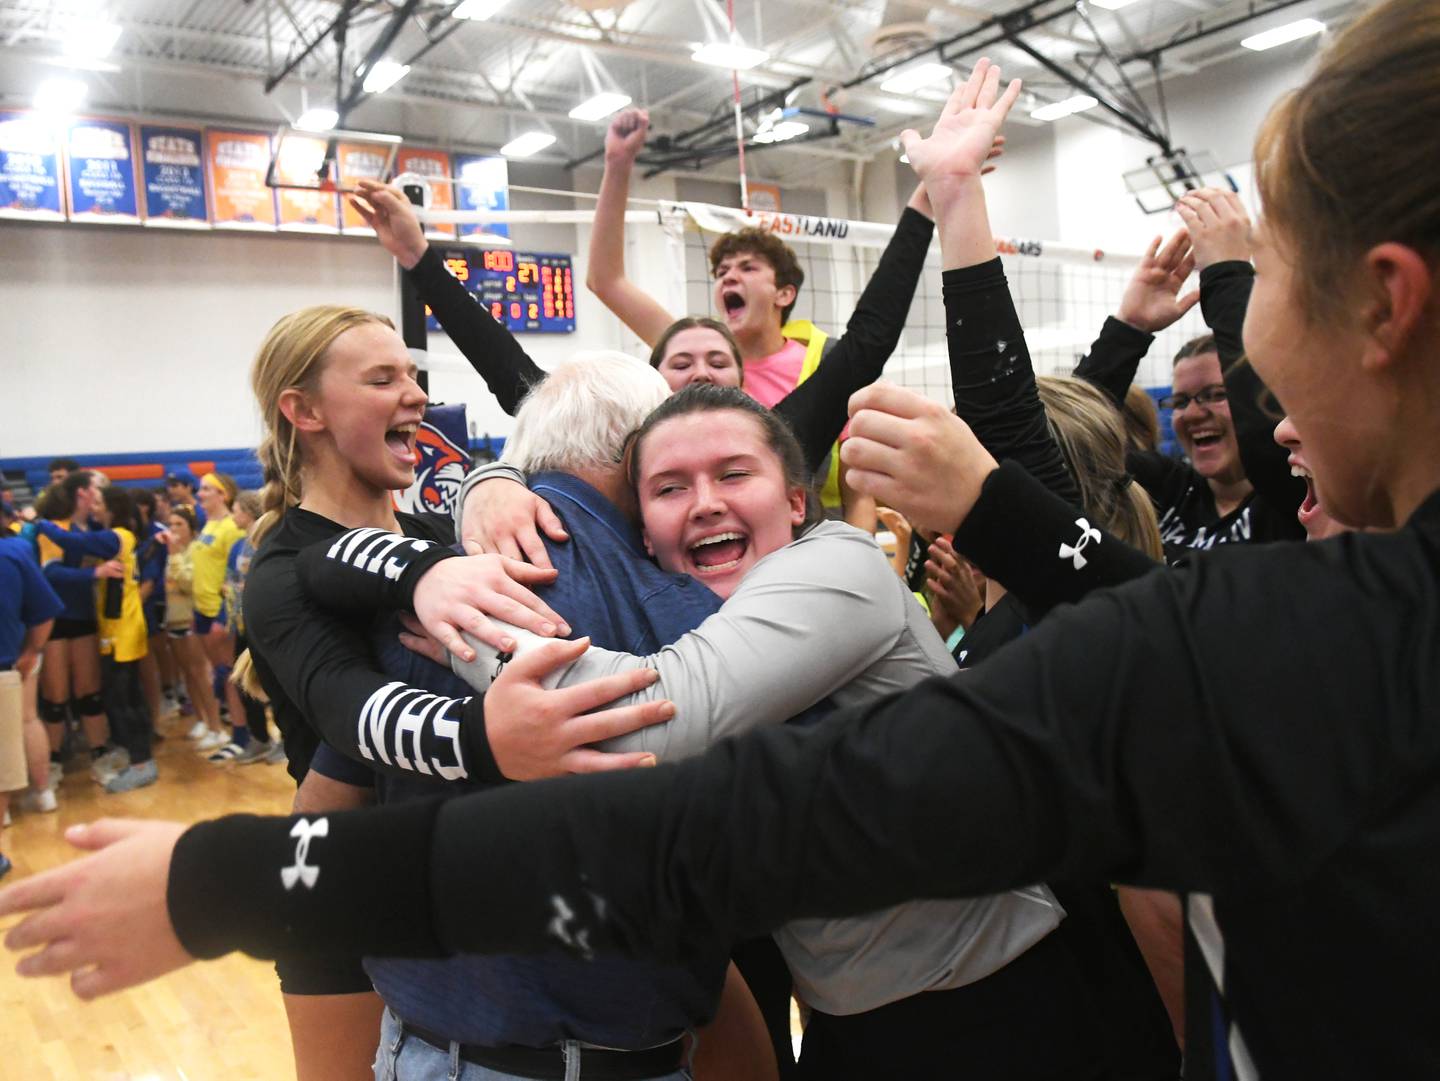 Newman's Addison Foster gets a big hug from a fan as she celebrates with her teammates after winning the 1A Eastland Supersectional in Lanark on Friday, Nov.4.